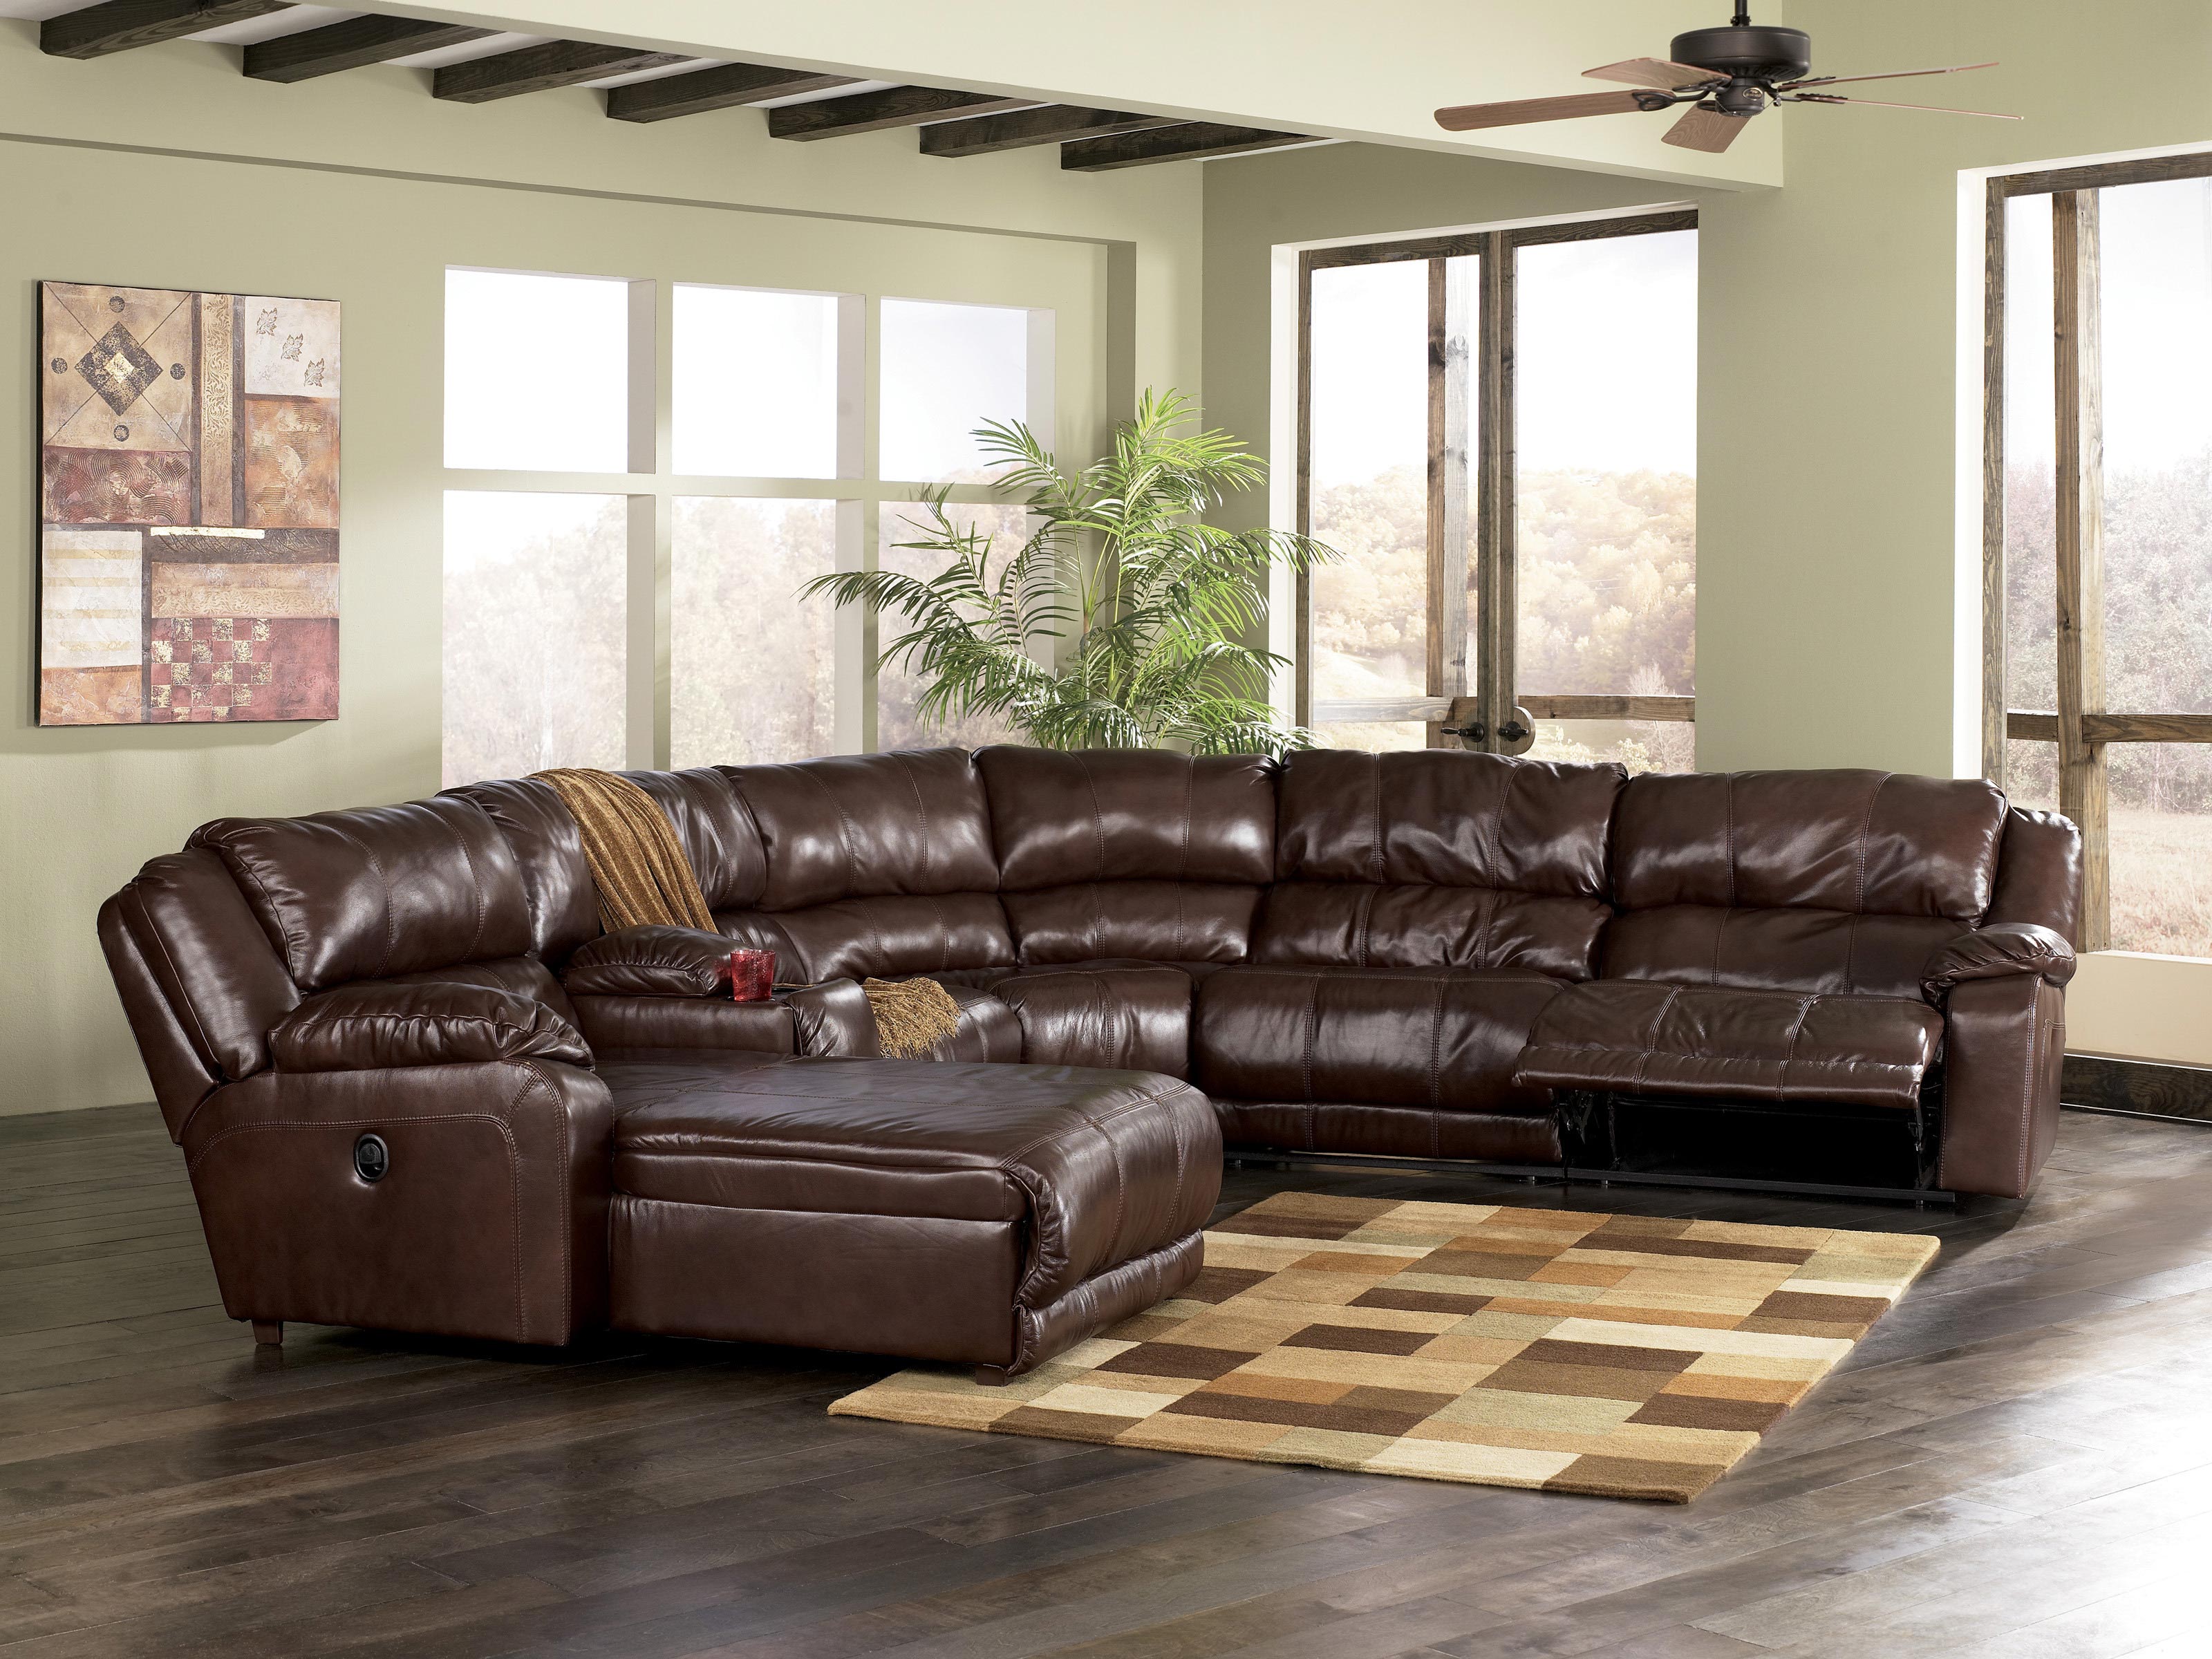 decorating living room with leather sofa